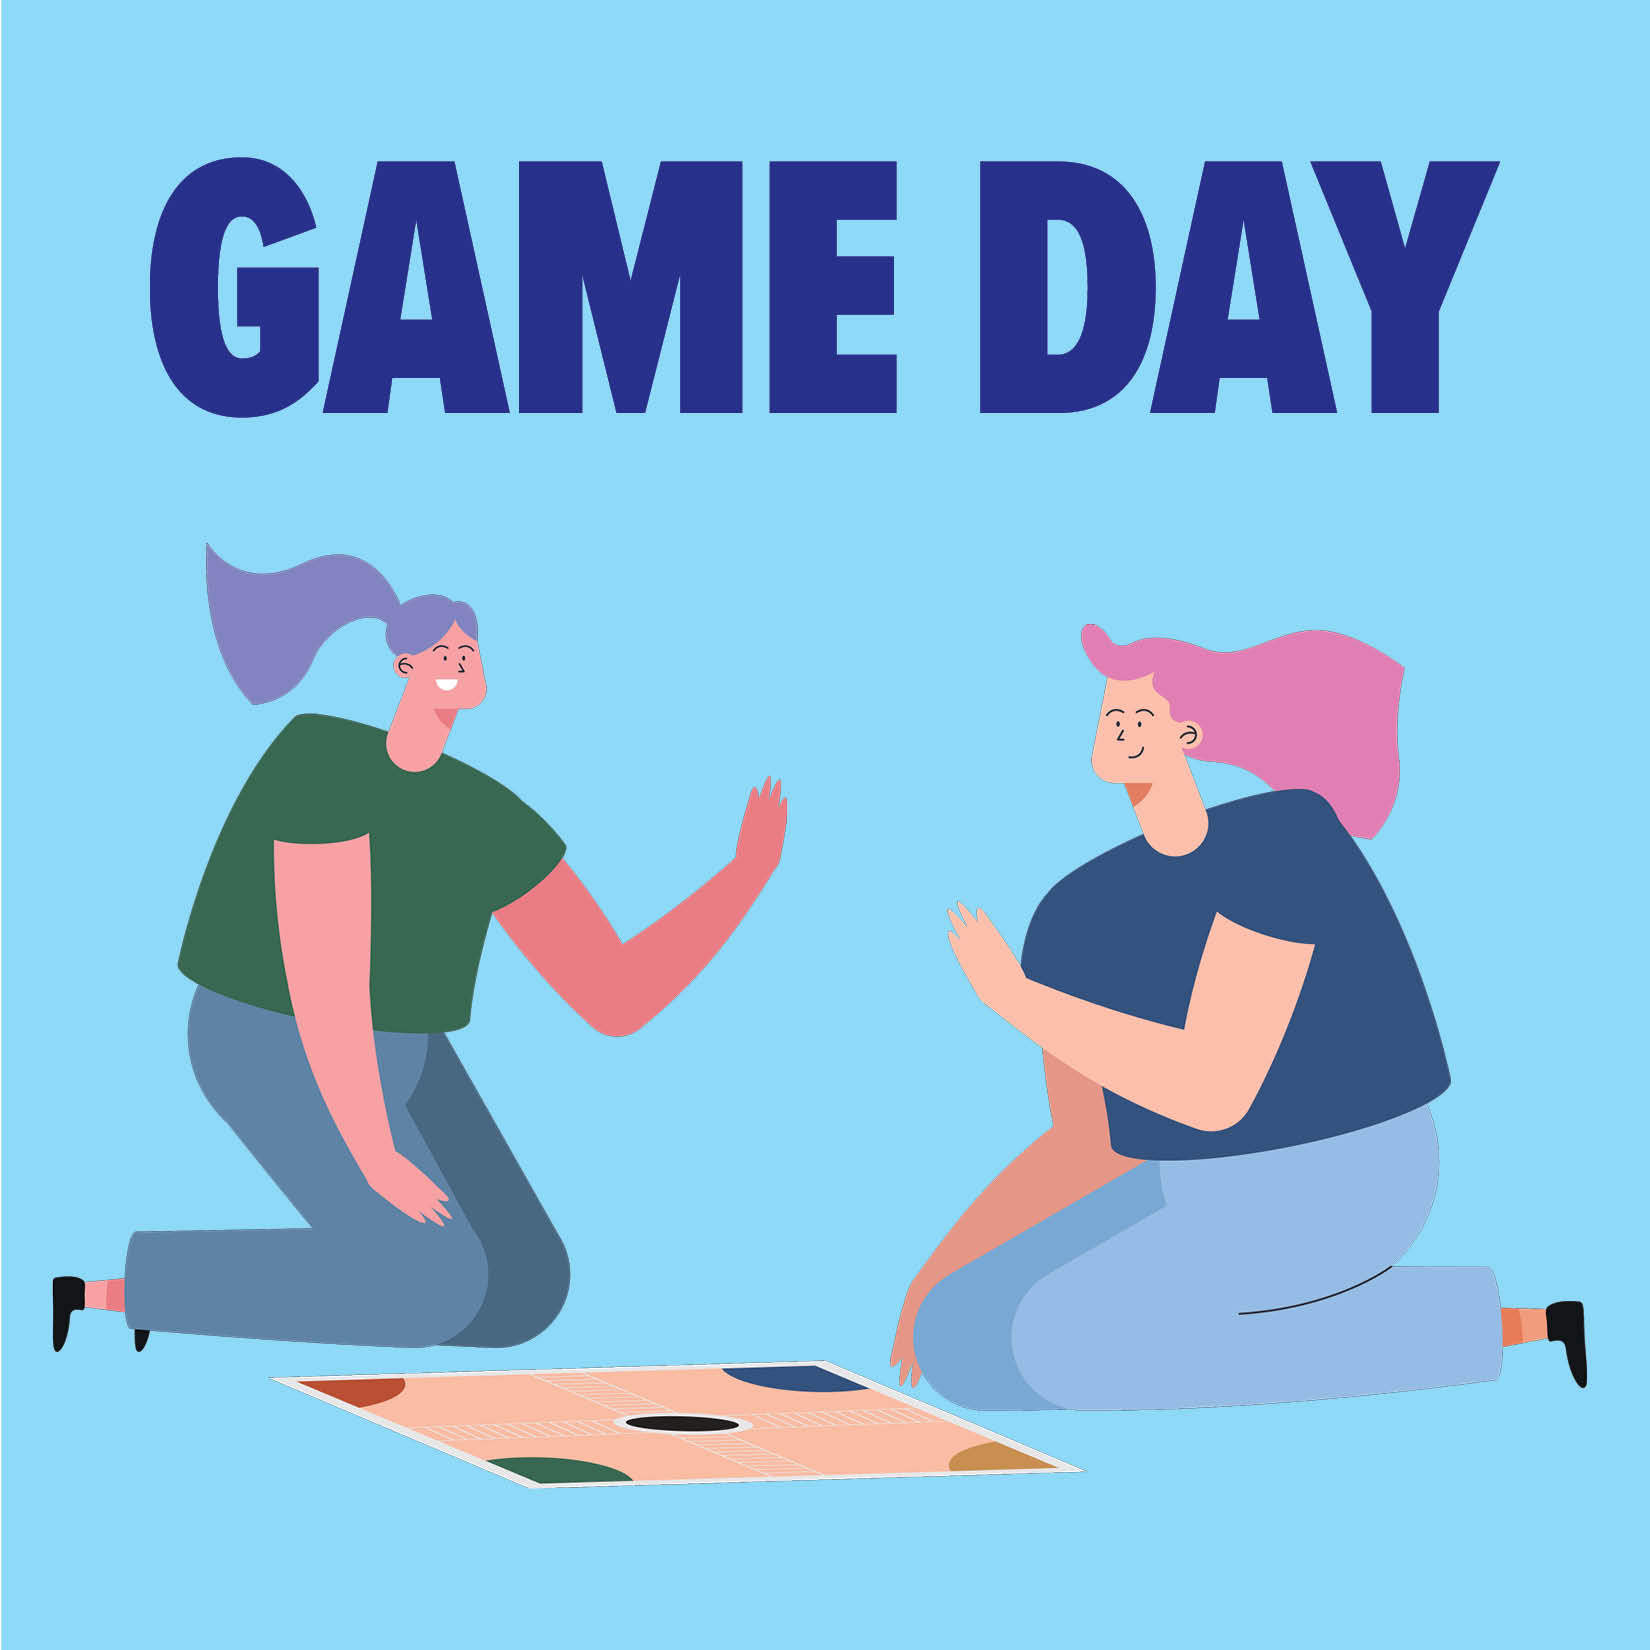 Two cartoon women playing a game in front of a blue backgraound